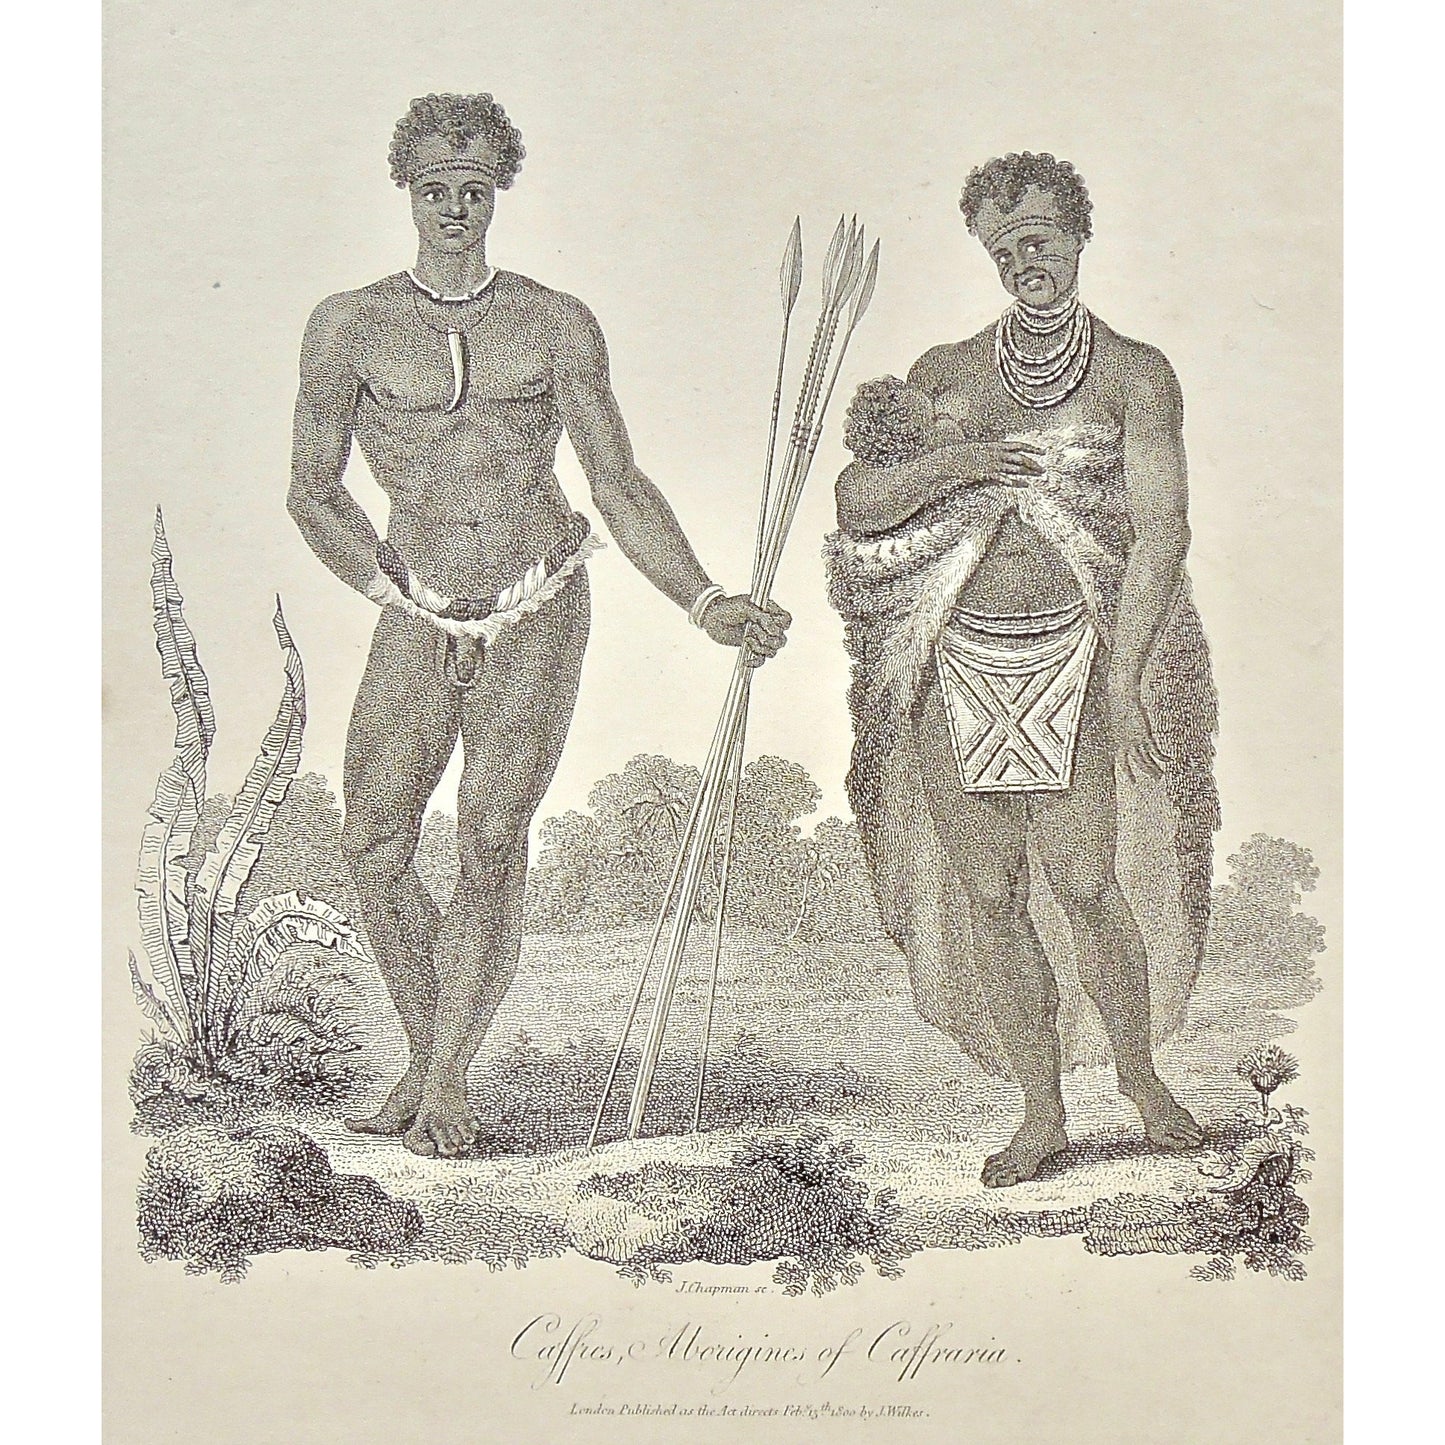 Aborigines, Aboriginal, Aboriginals, Caffres, Cafre, Kafs, Caffraria, Kaffraria, South Africa, South African, Daggers, necklace, clothing, dress, jewelry, child, mother, feeding, Africa, Africans, fur, furs, Antique Prints, Prints, Antique, Original, Rare, Rare prints, printmaking, rare books, antique books, old prints, vintage prints, authentic prints, middle eastern prints, Middle East, Slaves, History of Art, art history, historical prints, wall decor, wall art, home decor, design, engravings, African